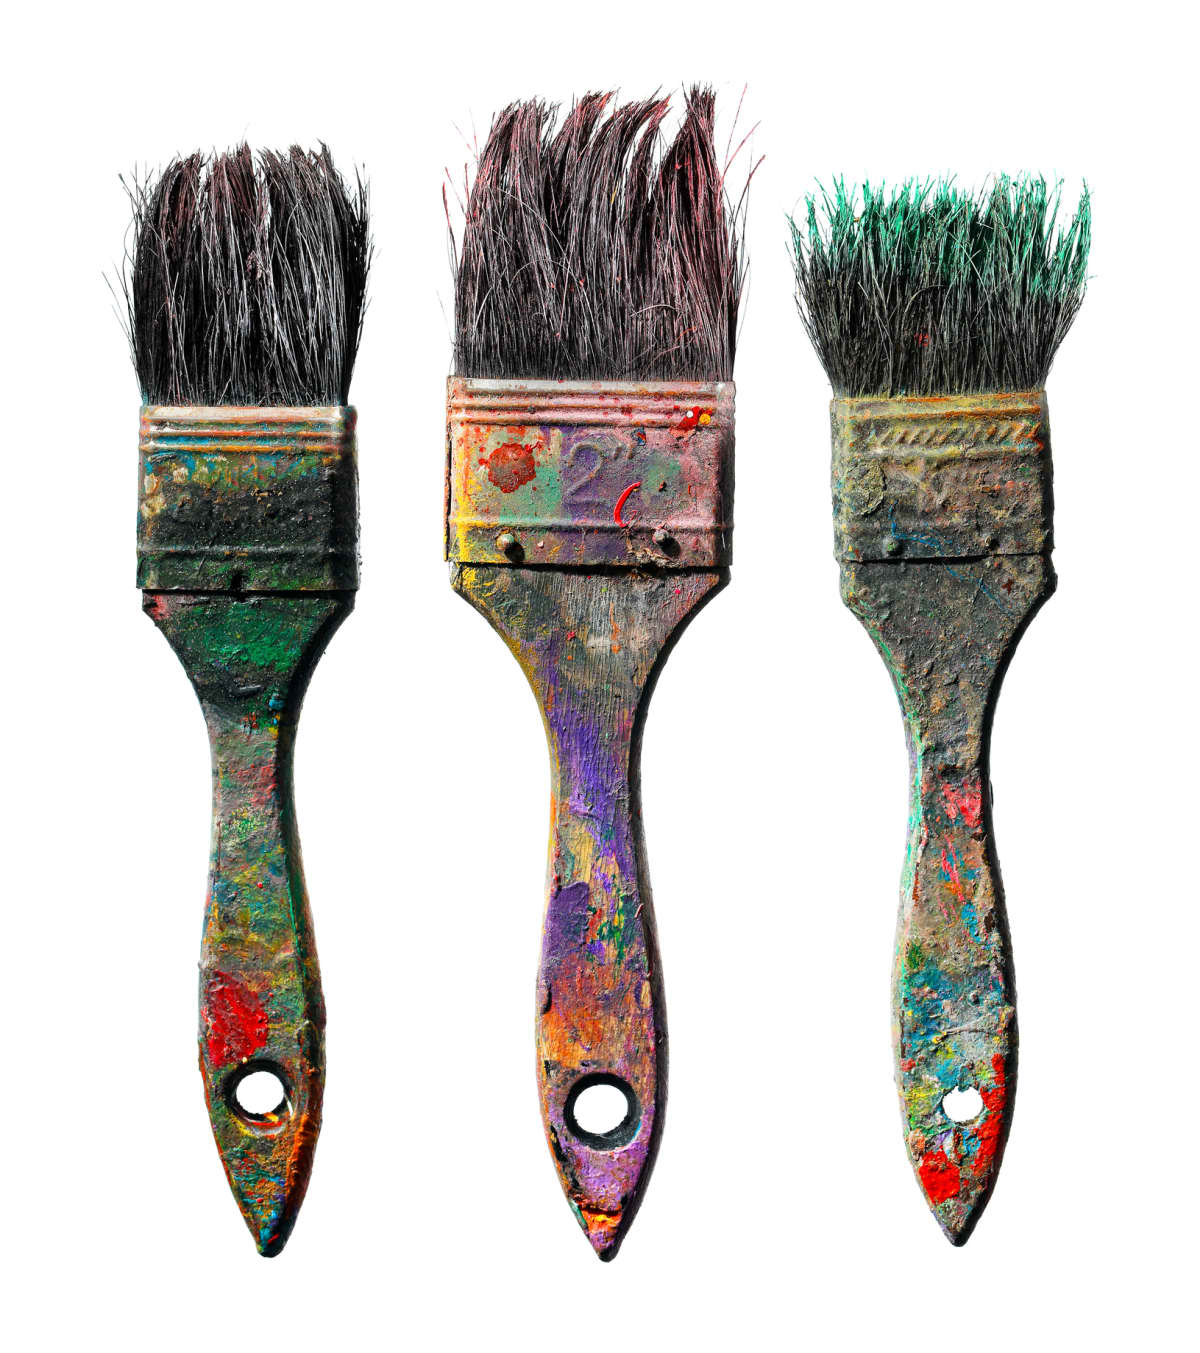 Dirty paint brushes against a white background